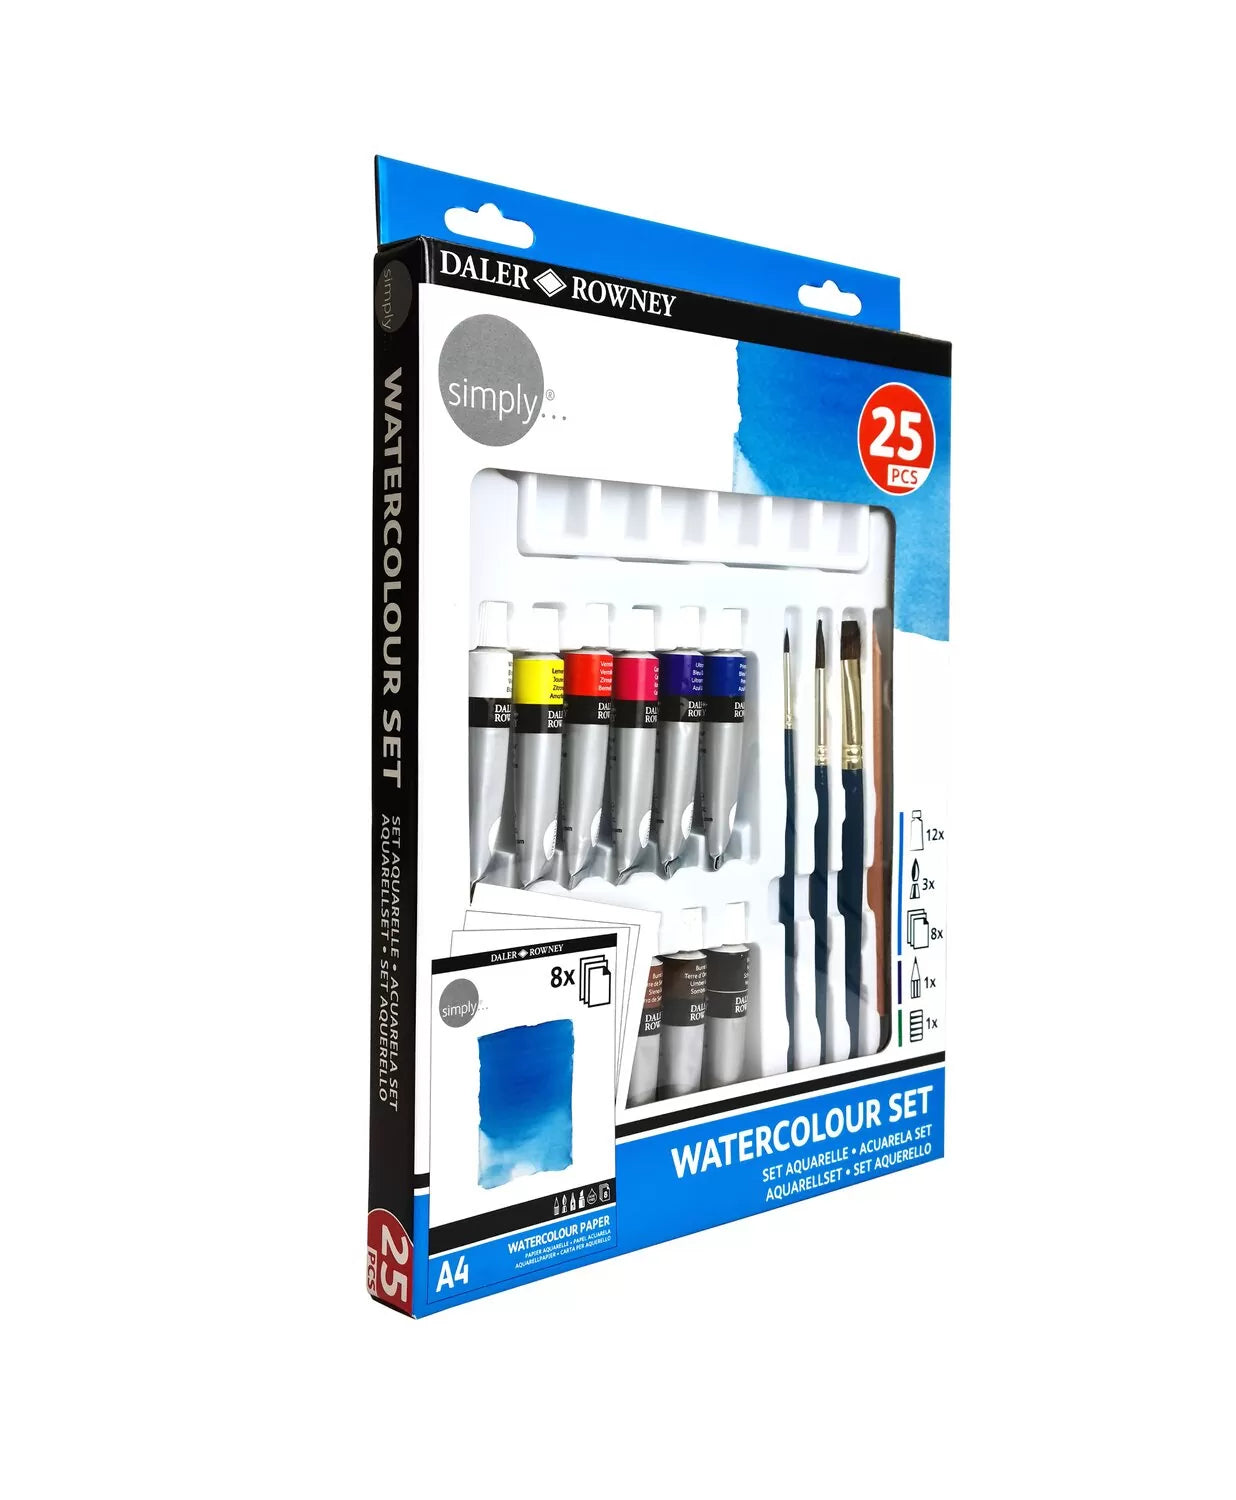 Daler-Rowney Simply Watercolor Painting Set Of 25 Piece